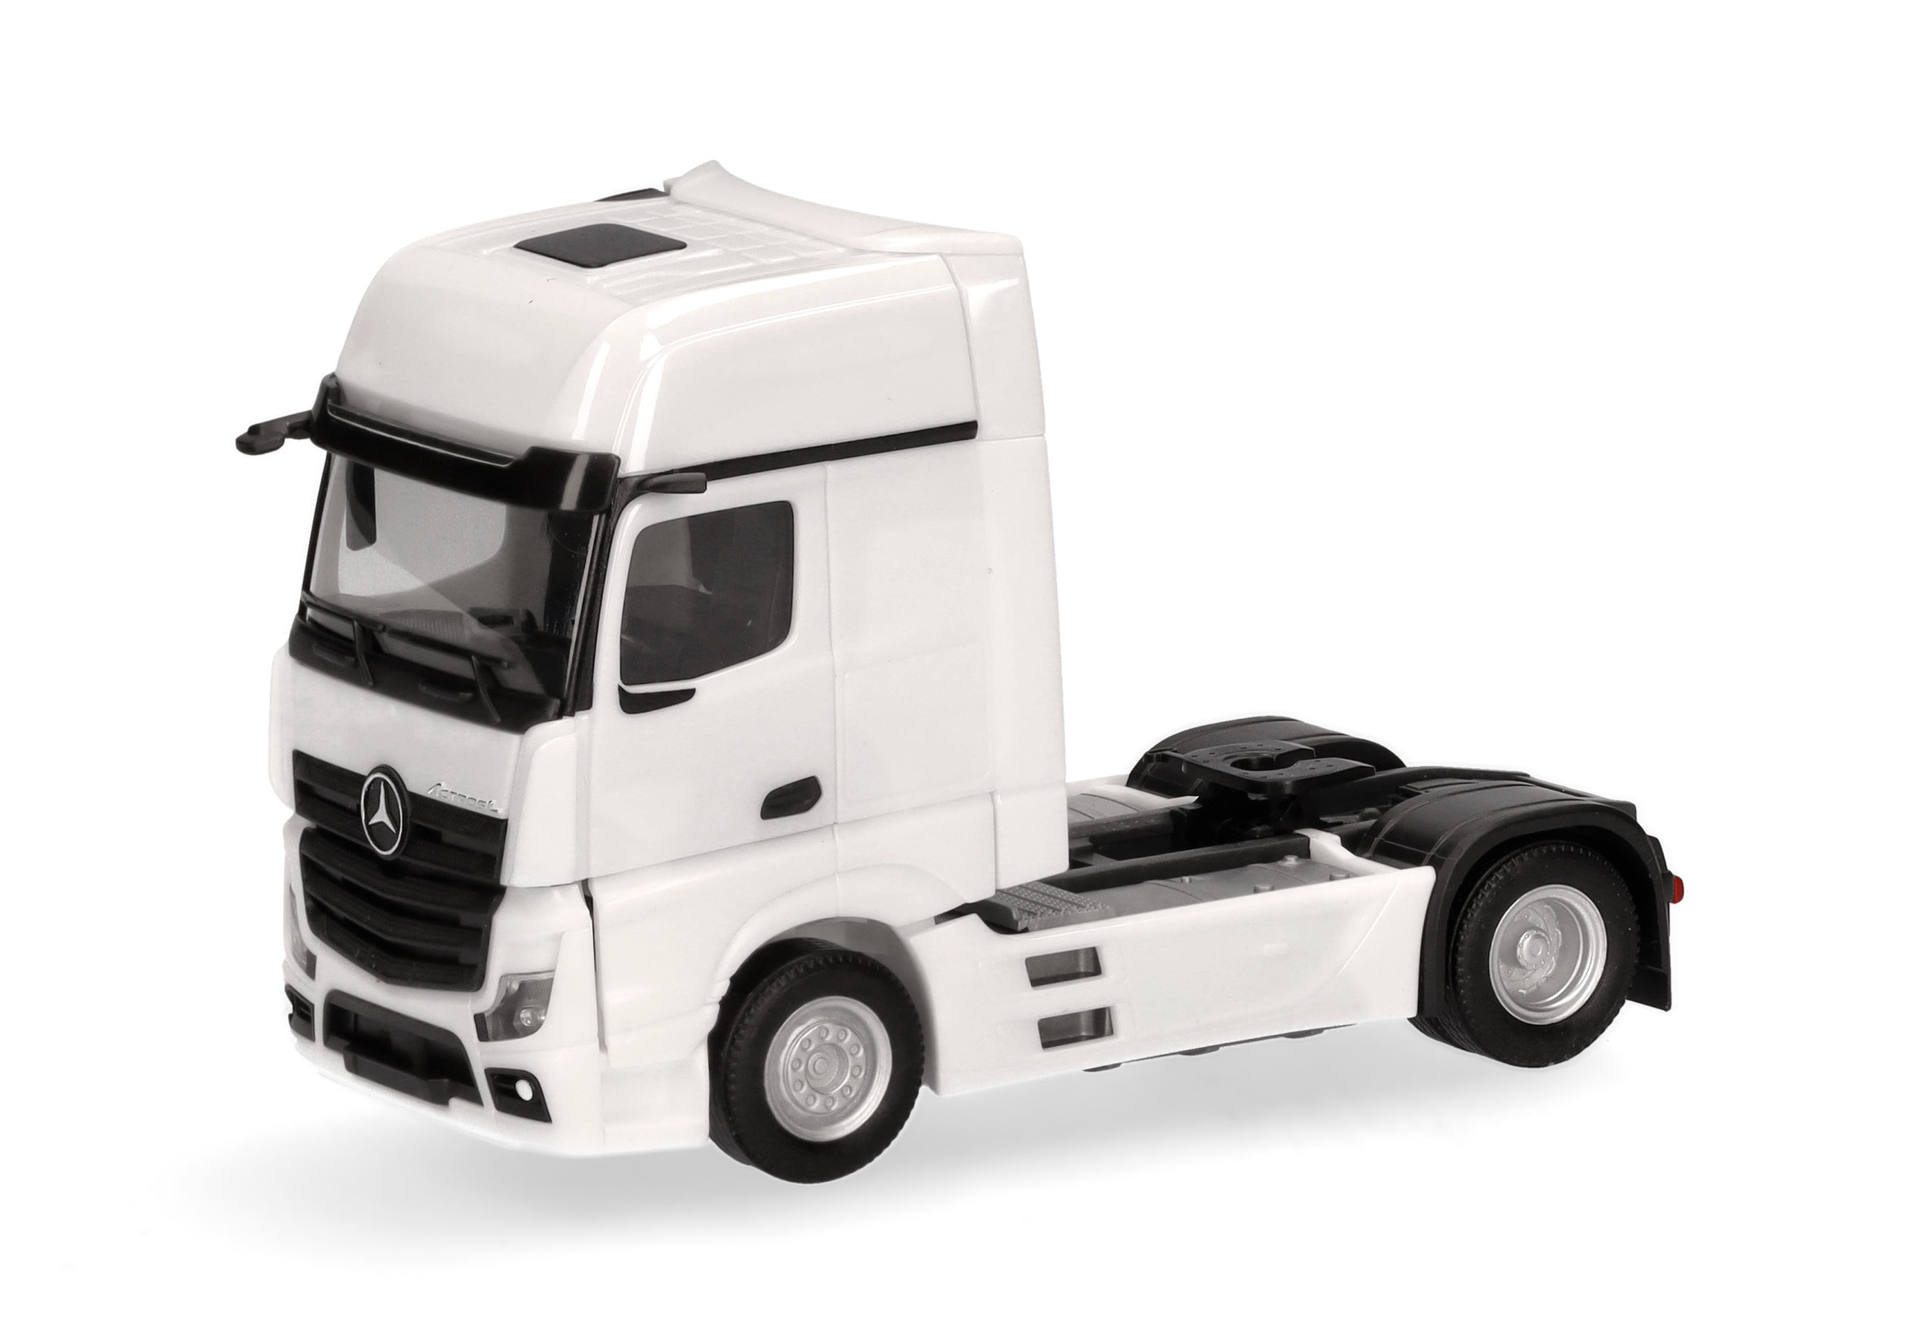 Mercedes-Benz Actros L Gigaspace rigid tractor 2axles, white